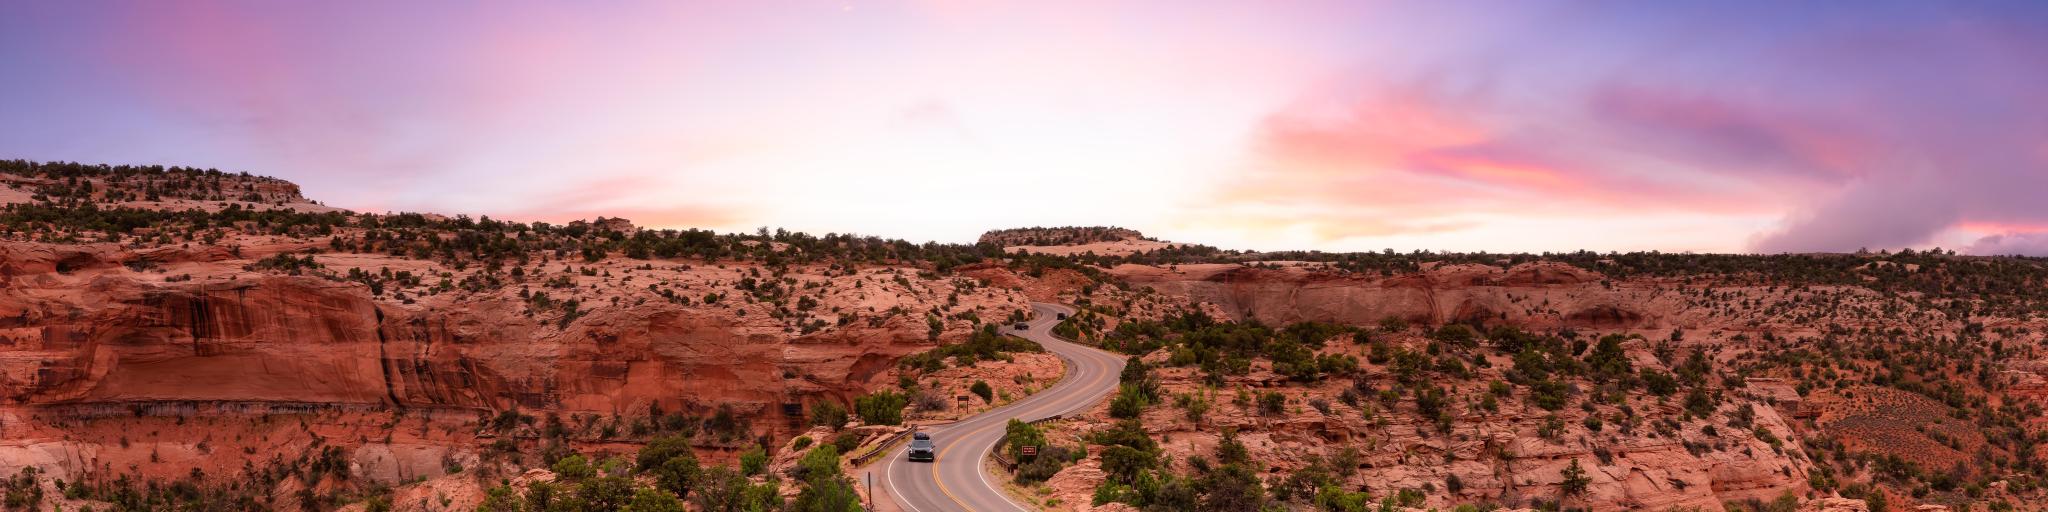 Scenic road running through Canyonlands National Park beneath a purple-hued sunset sky, with red rocks on the horizon